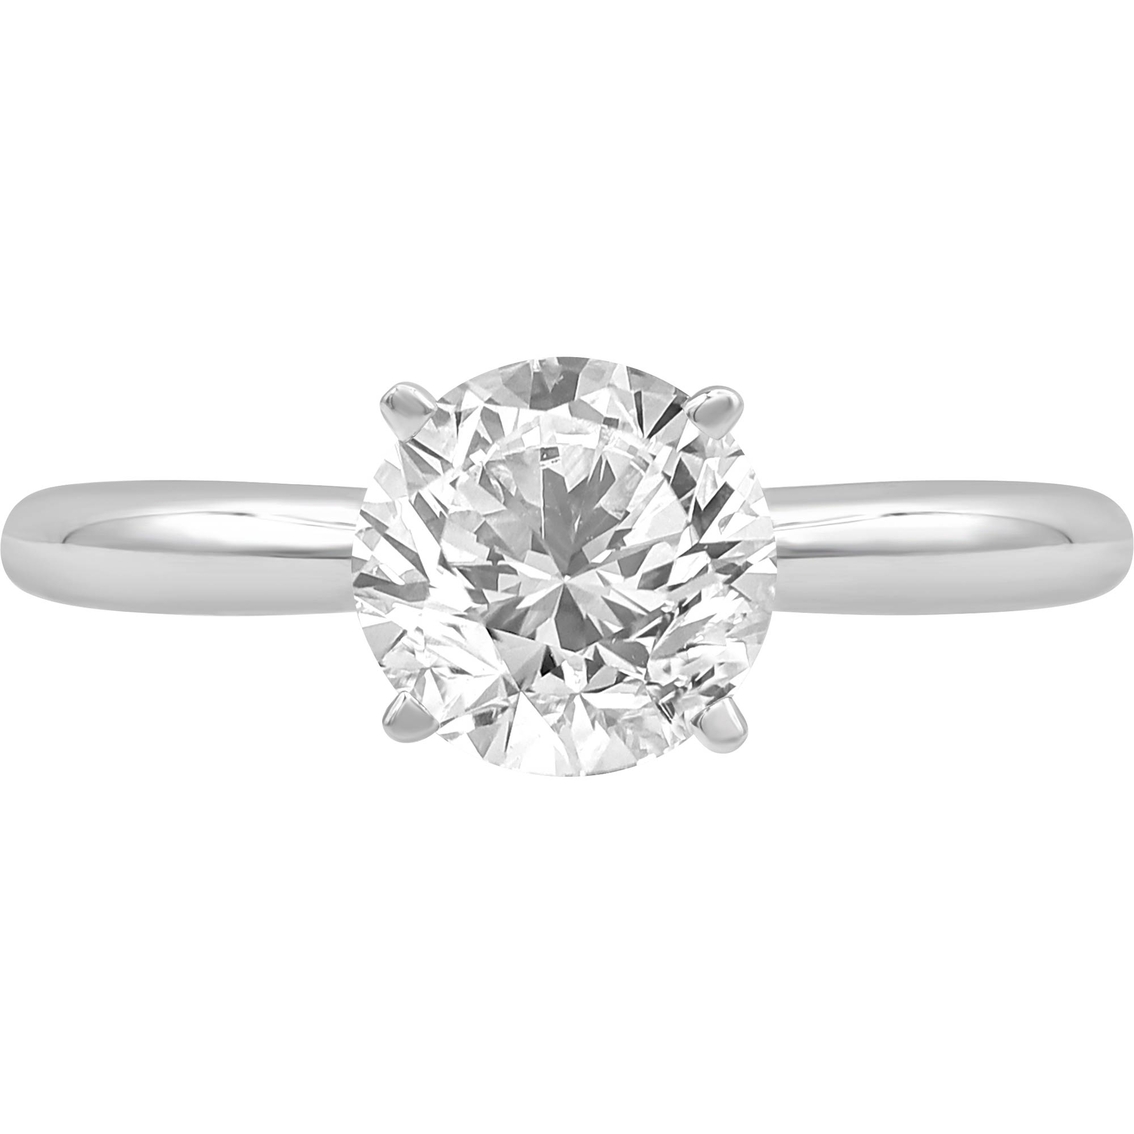 14K White Gold 1 1/2 ct. Diamond Solitaire Ring, Size 7 - Image 2 of 5